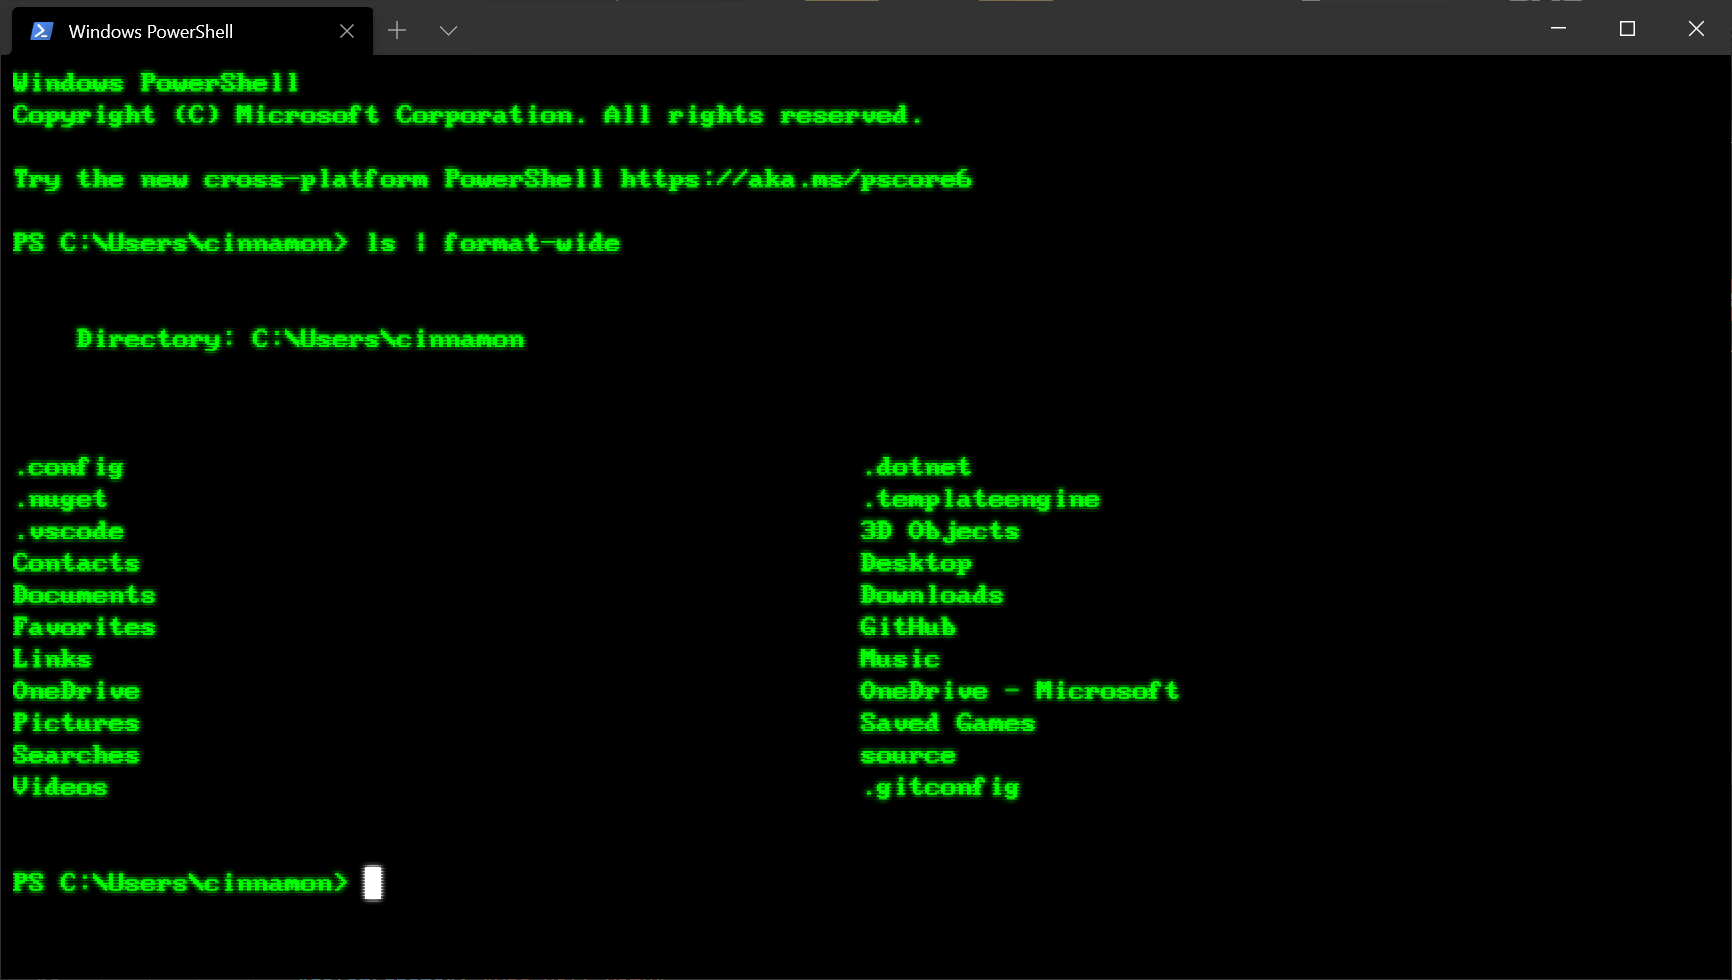 Command Prompt and PowerShell icons